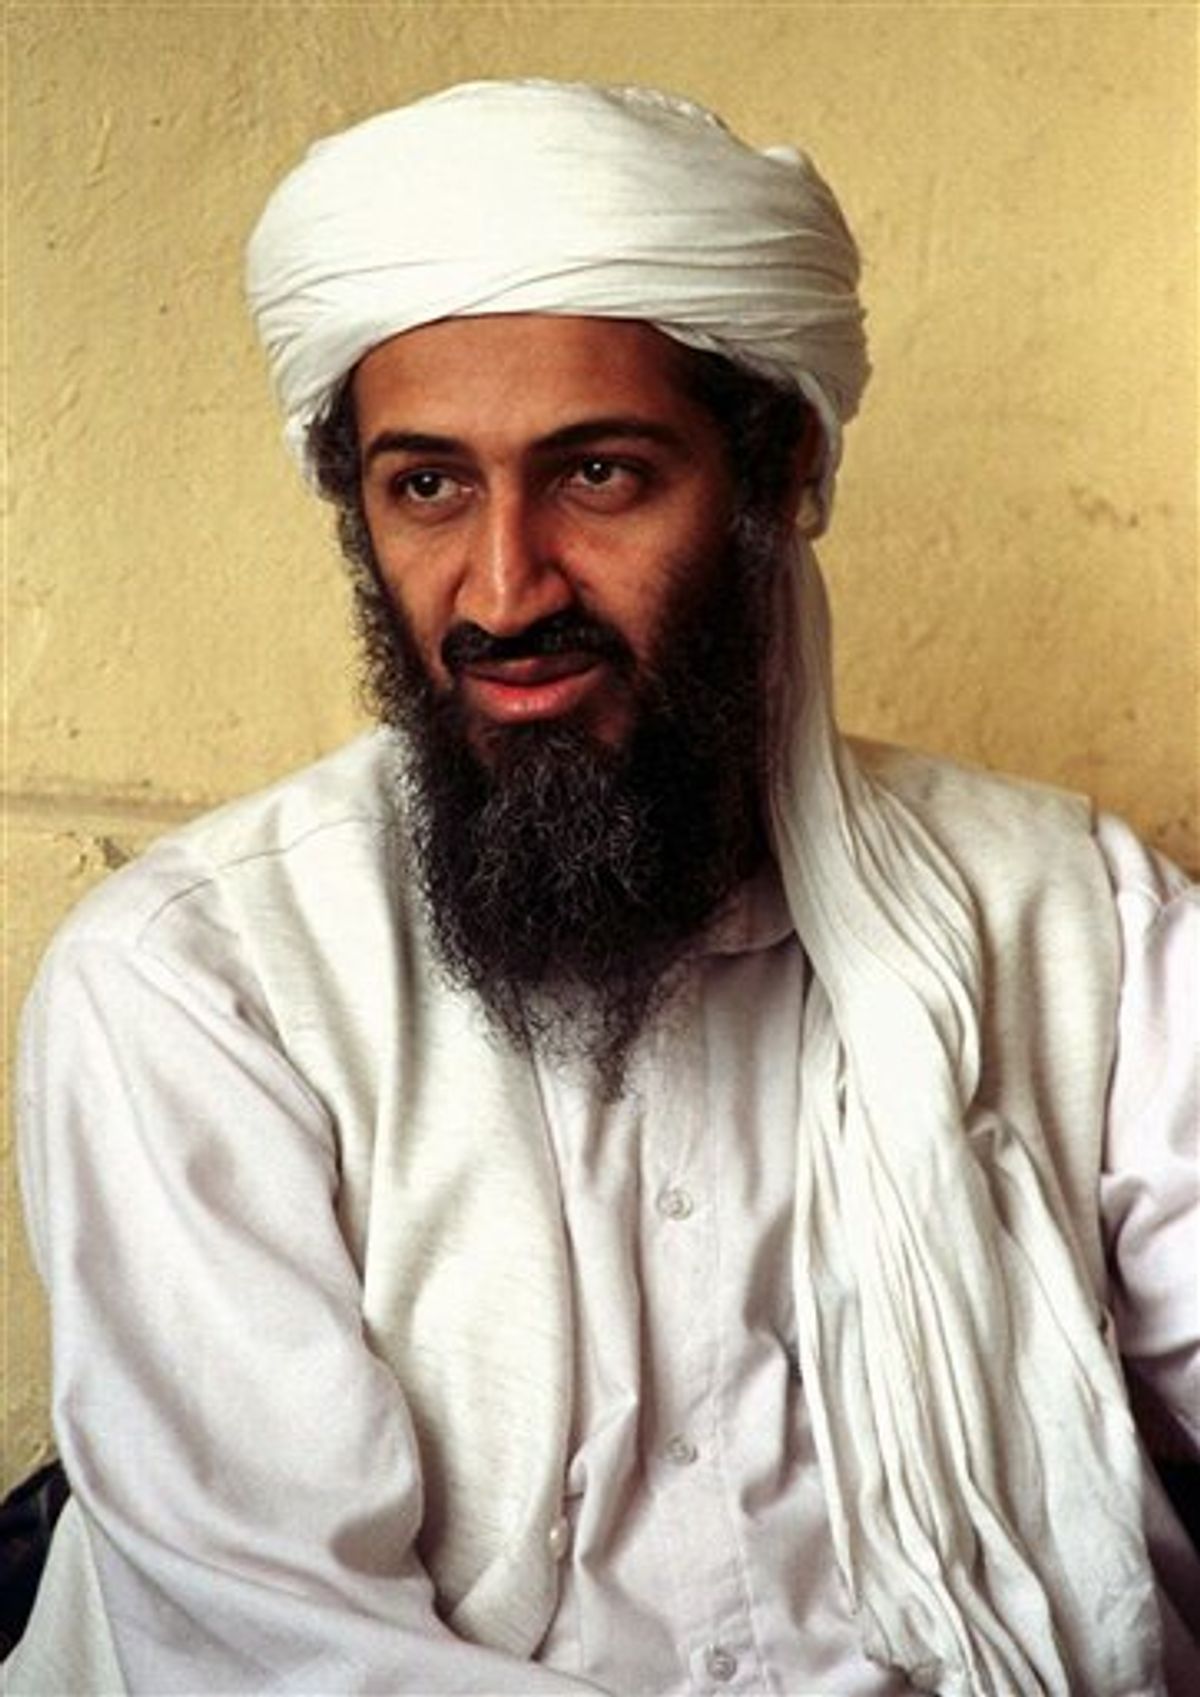 FILE - This April 1998 file photo shows exiled al Qaida leader Osama bin Laden in Afghanistan. Osama bin Laden's personal files revealed a brazen idea to hijack oil tankers and blow them up at sea last summer, creating explosions he hoped would rattle the world's economy and send oil prices skyrocketing, the U.S. said Friday, May 20, 2011.  (AP File Photo) (AP)